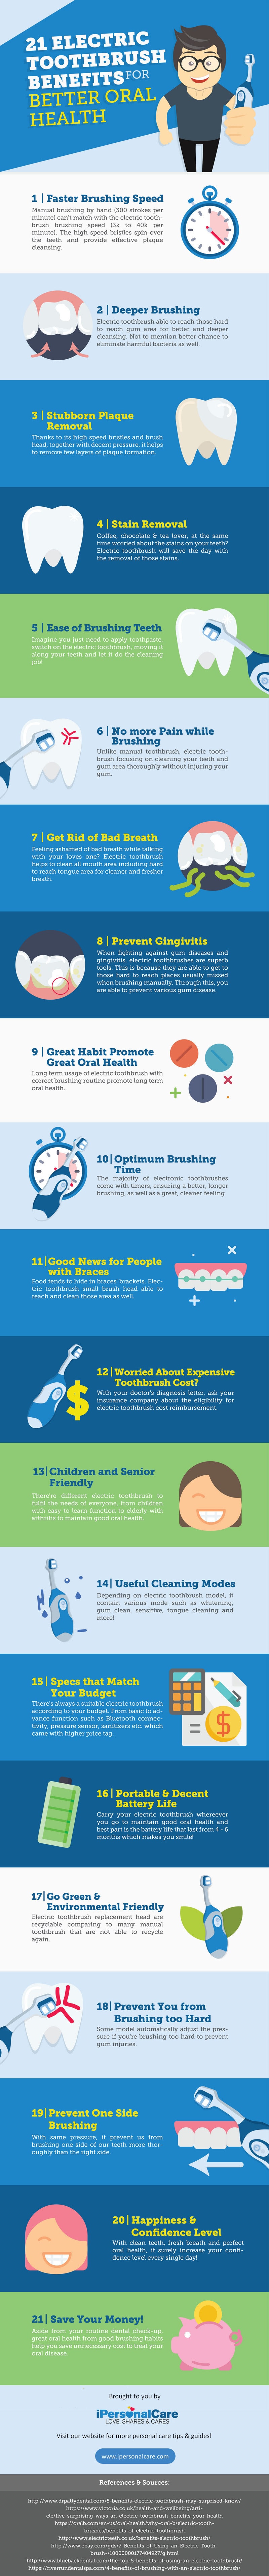 21 Electric Toothbrush Benefits for Better Dental Health